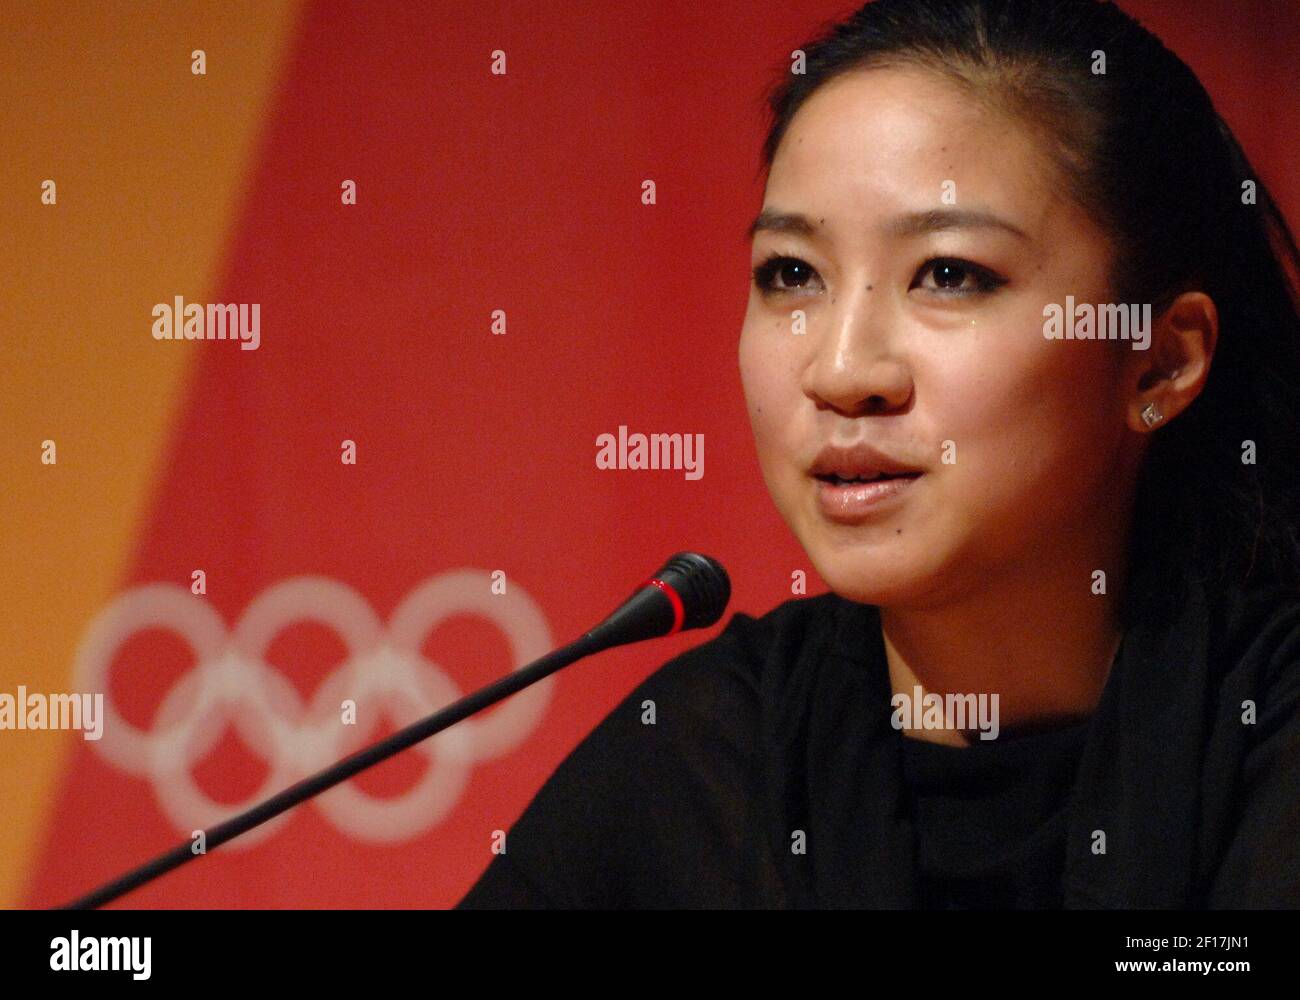 U.S. figure skater Michelle Kwan speaks about her decision to withdraw from competition in the 2006 Winter games during a press conference in Turin, Italy on Sunday, February 12, 2006. (Photo by Steve Deslich/KRT) Stock Photo